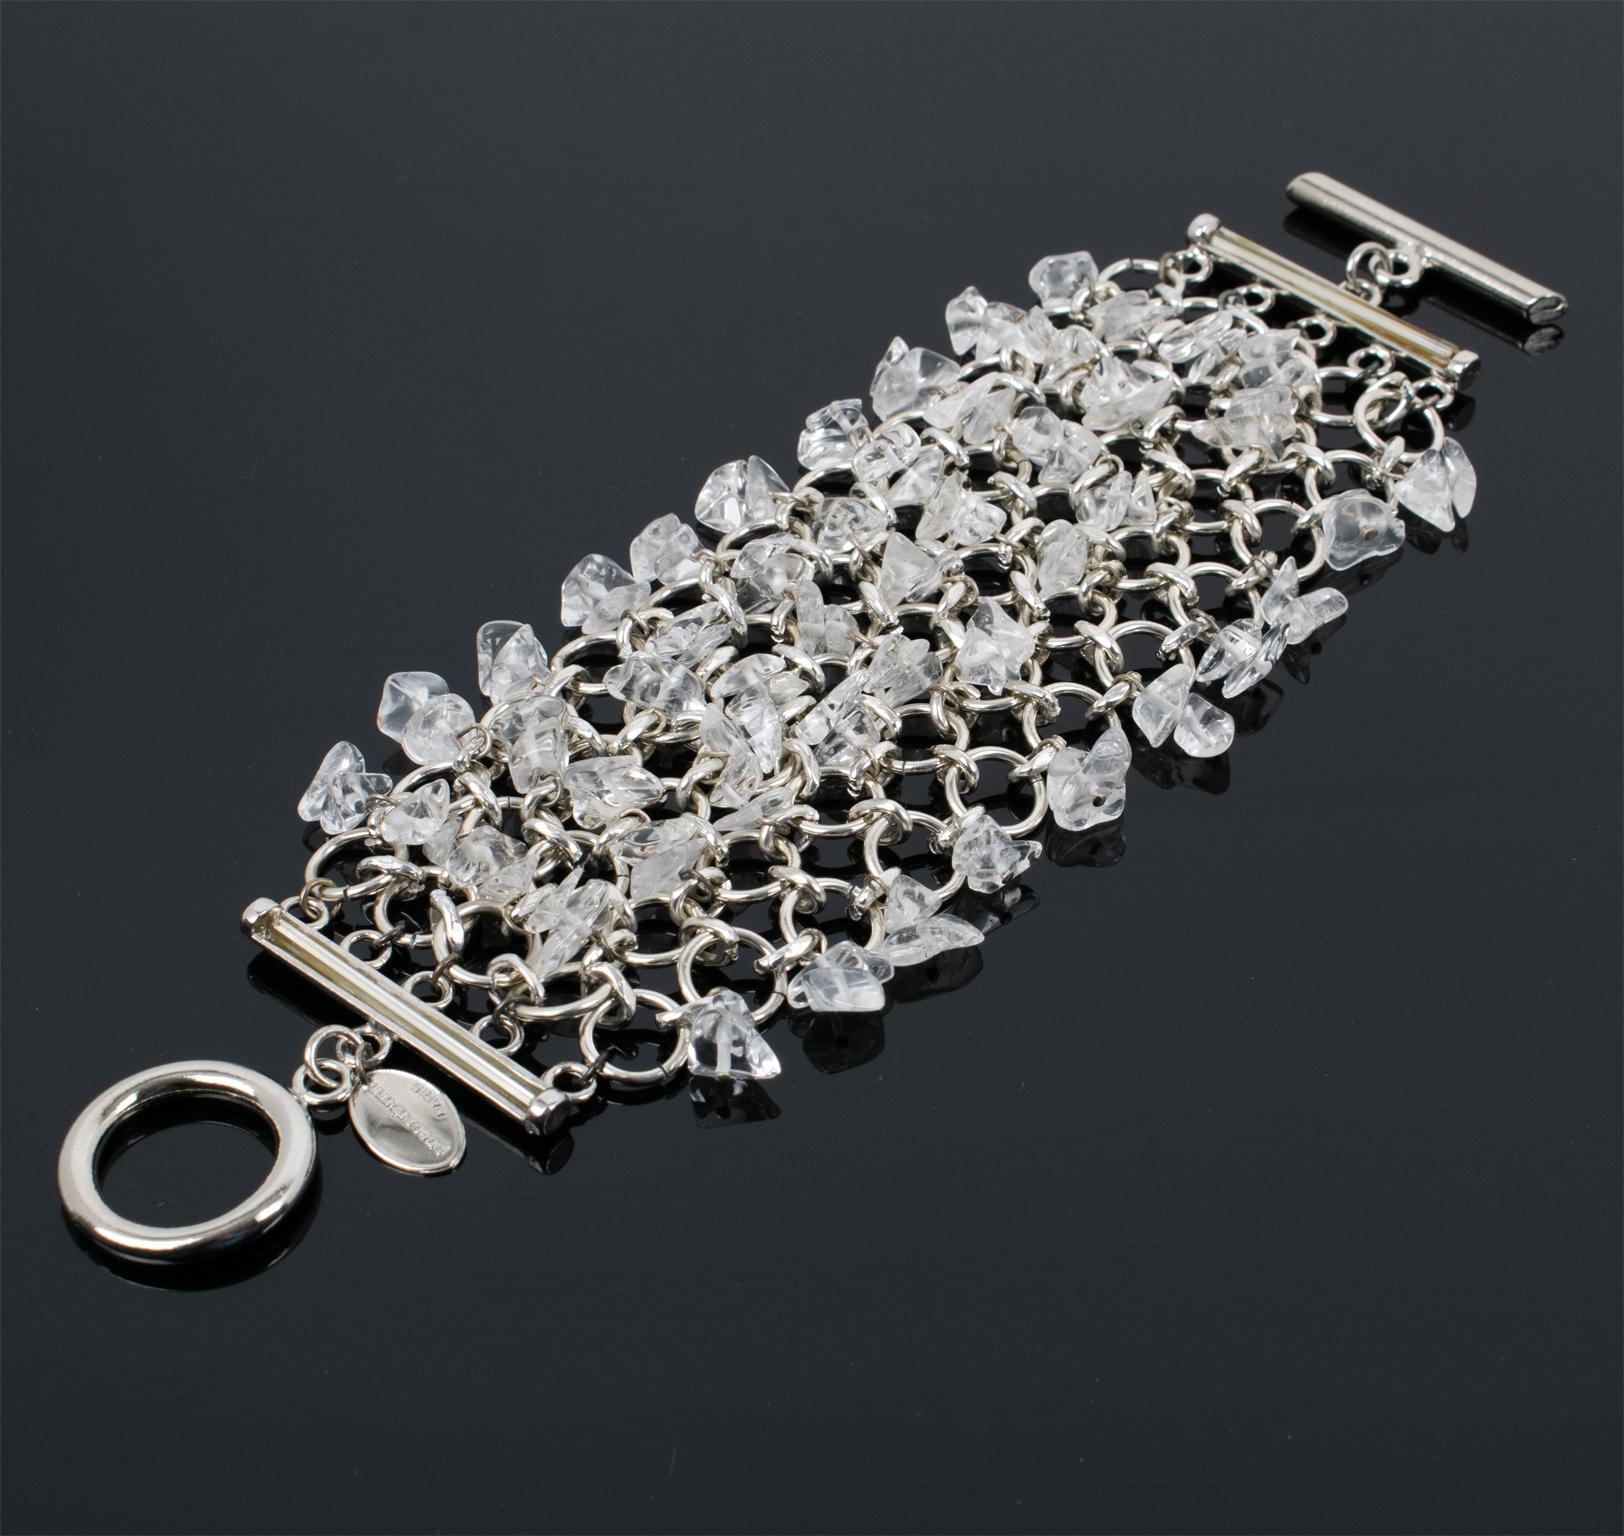 This gorgeous Paco Rabanne Paris futuristic link bracelet features a massive silver-tone chainmail grid ornate with dangle transparent quartz chips. The bracelet closes with a large toggle closing clasp, and the Paco Rabanne brand logo tag is